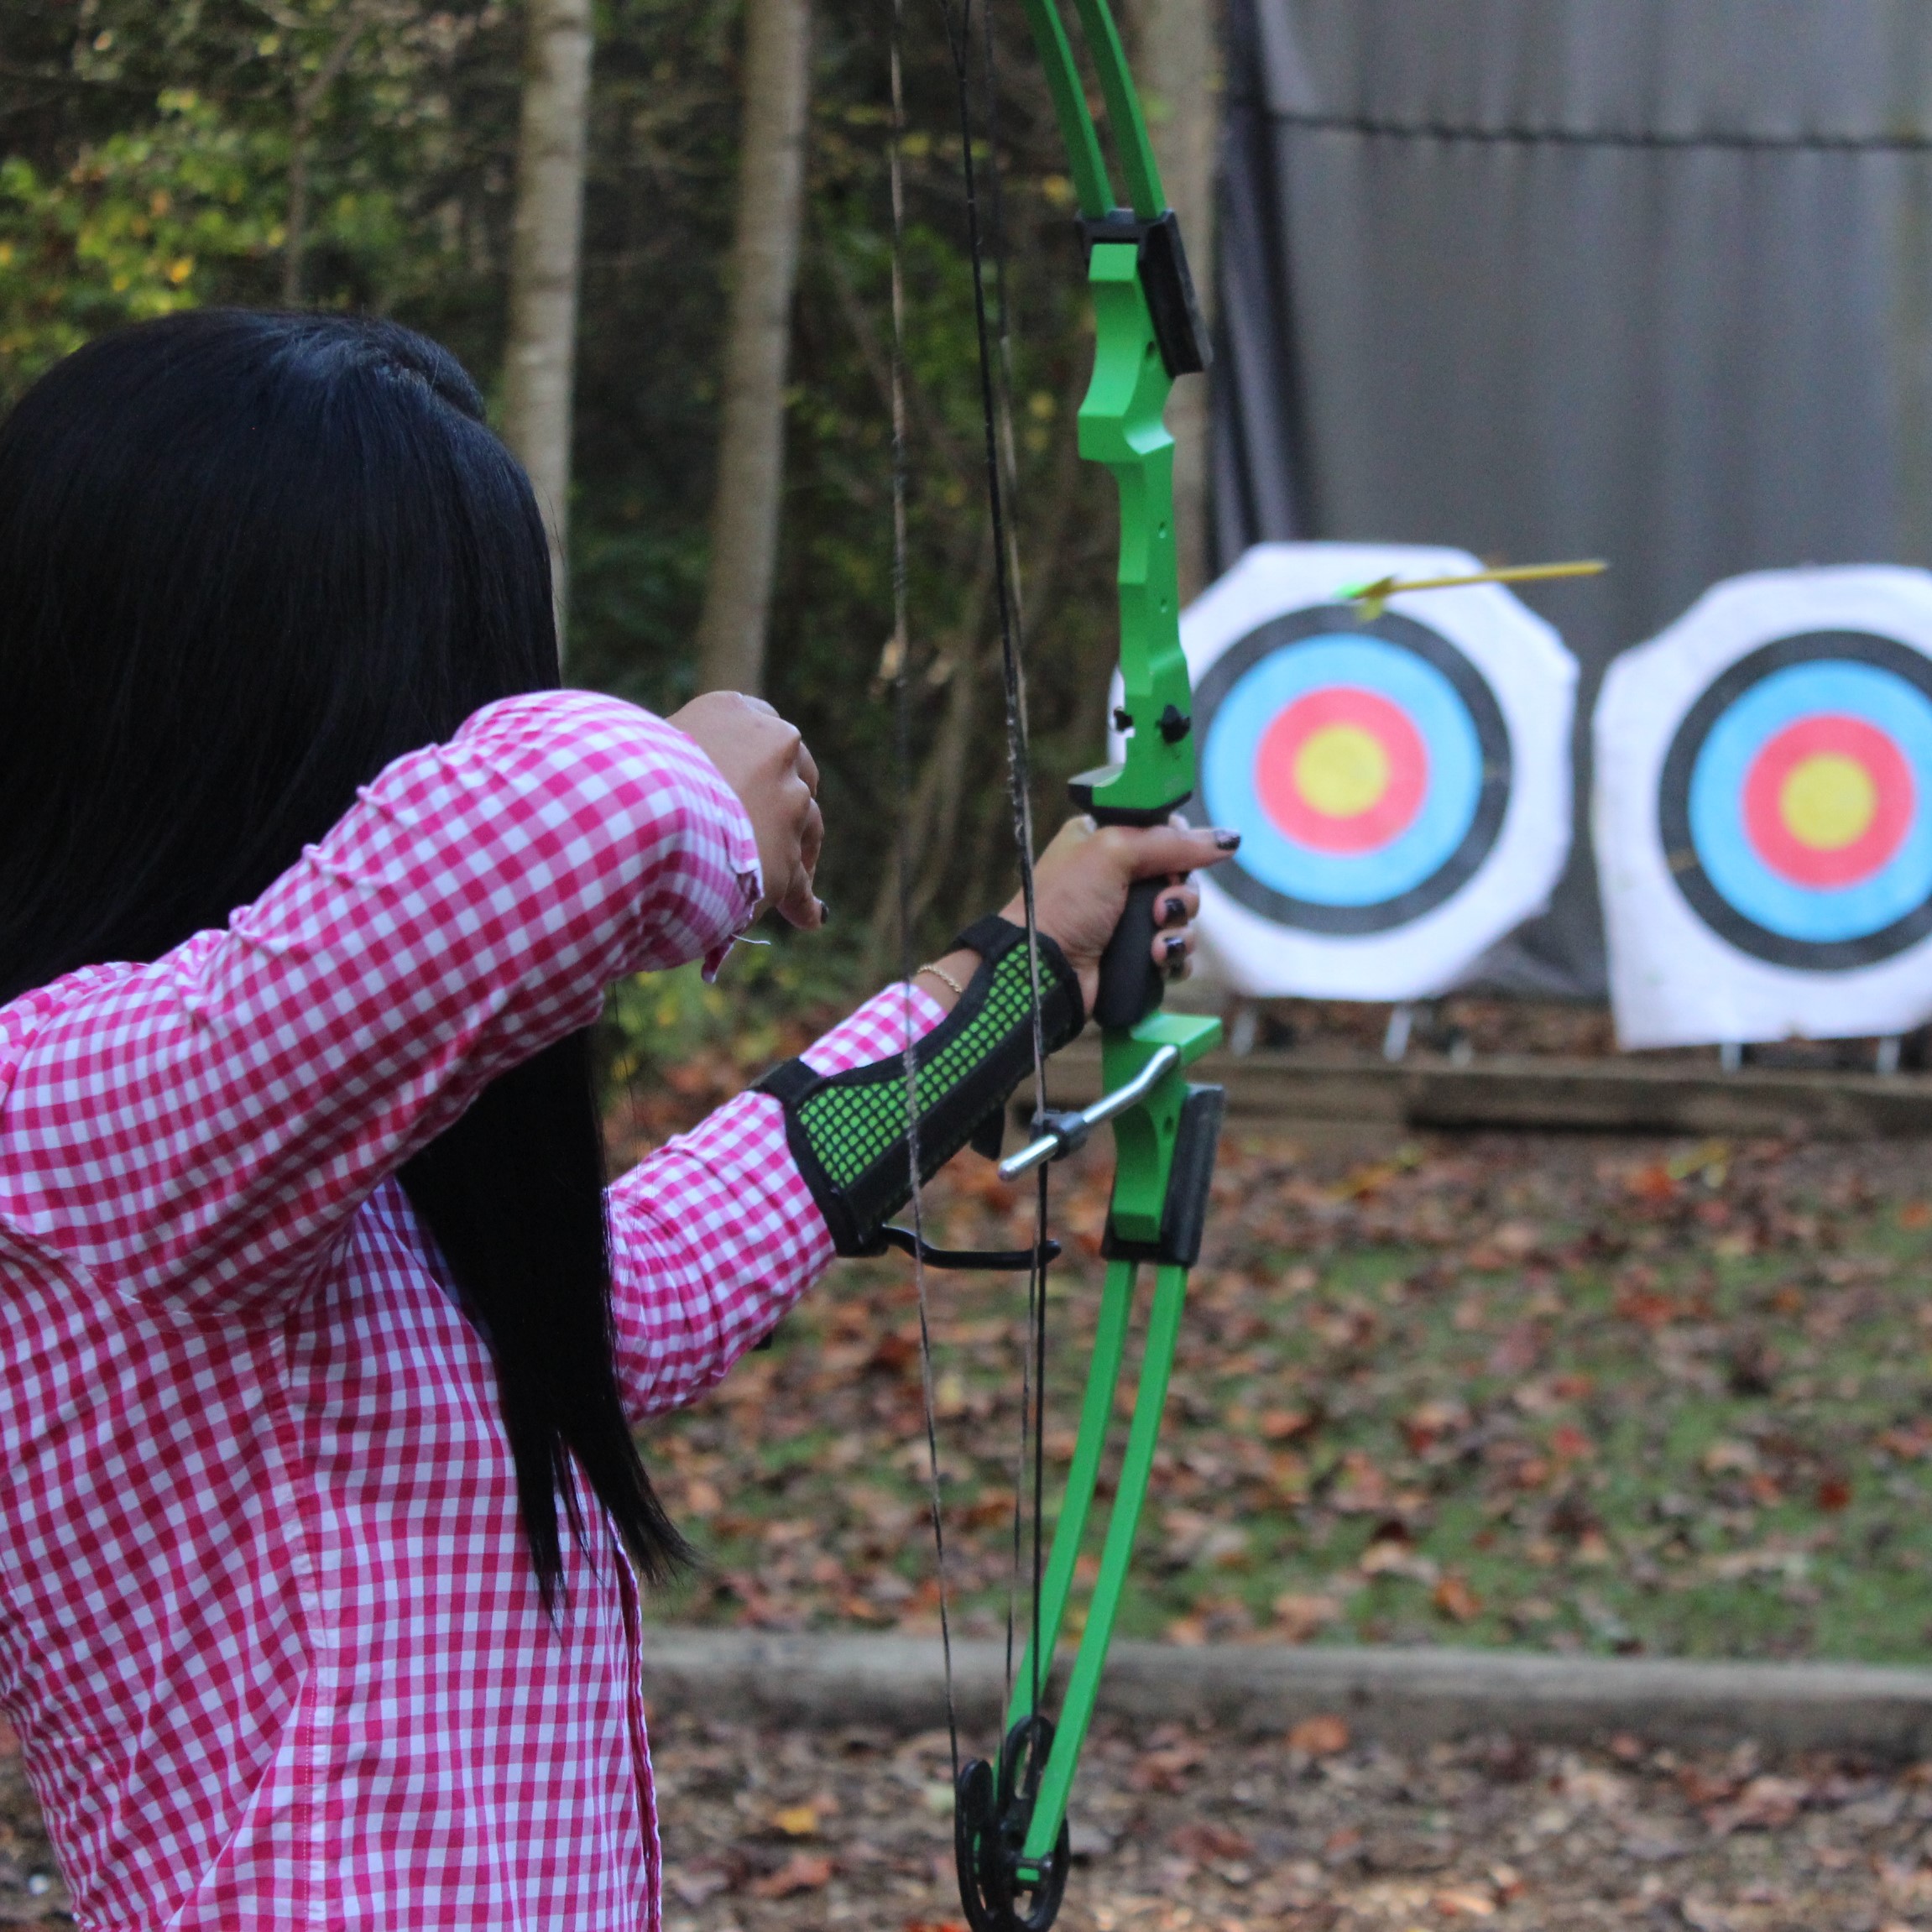 2017-10-16 Special Olympics Committee - Archery (22)